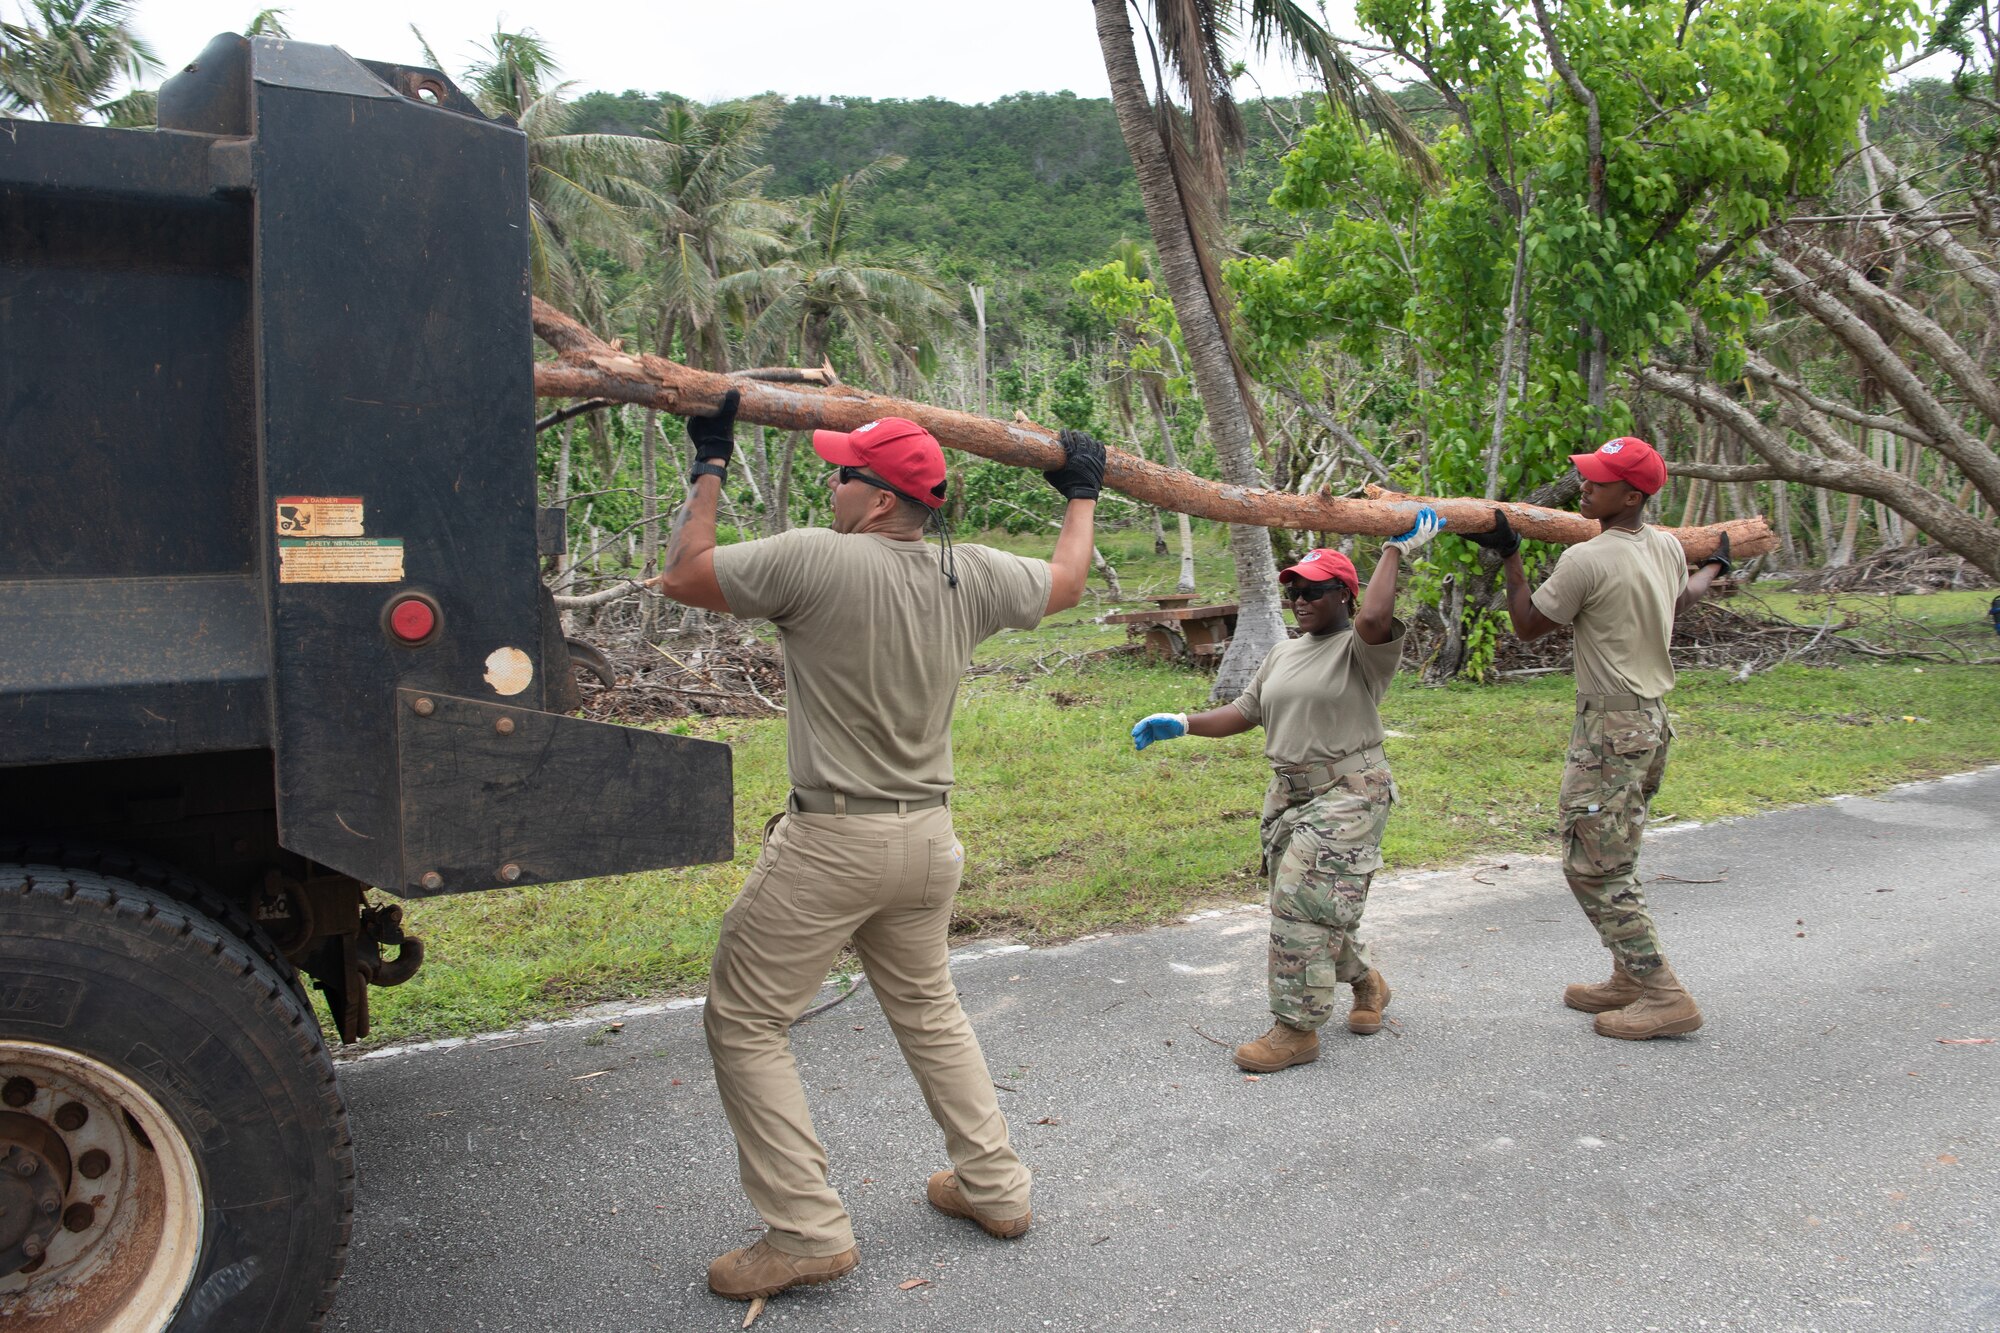 Three Airmen from a visiting squadron lifts a large tree branch.